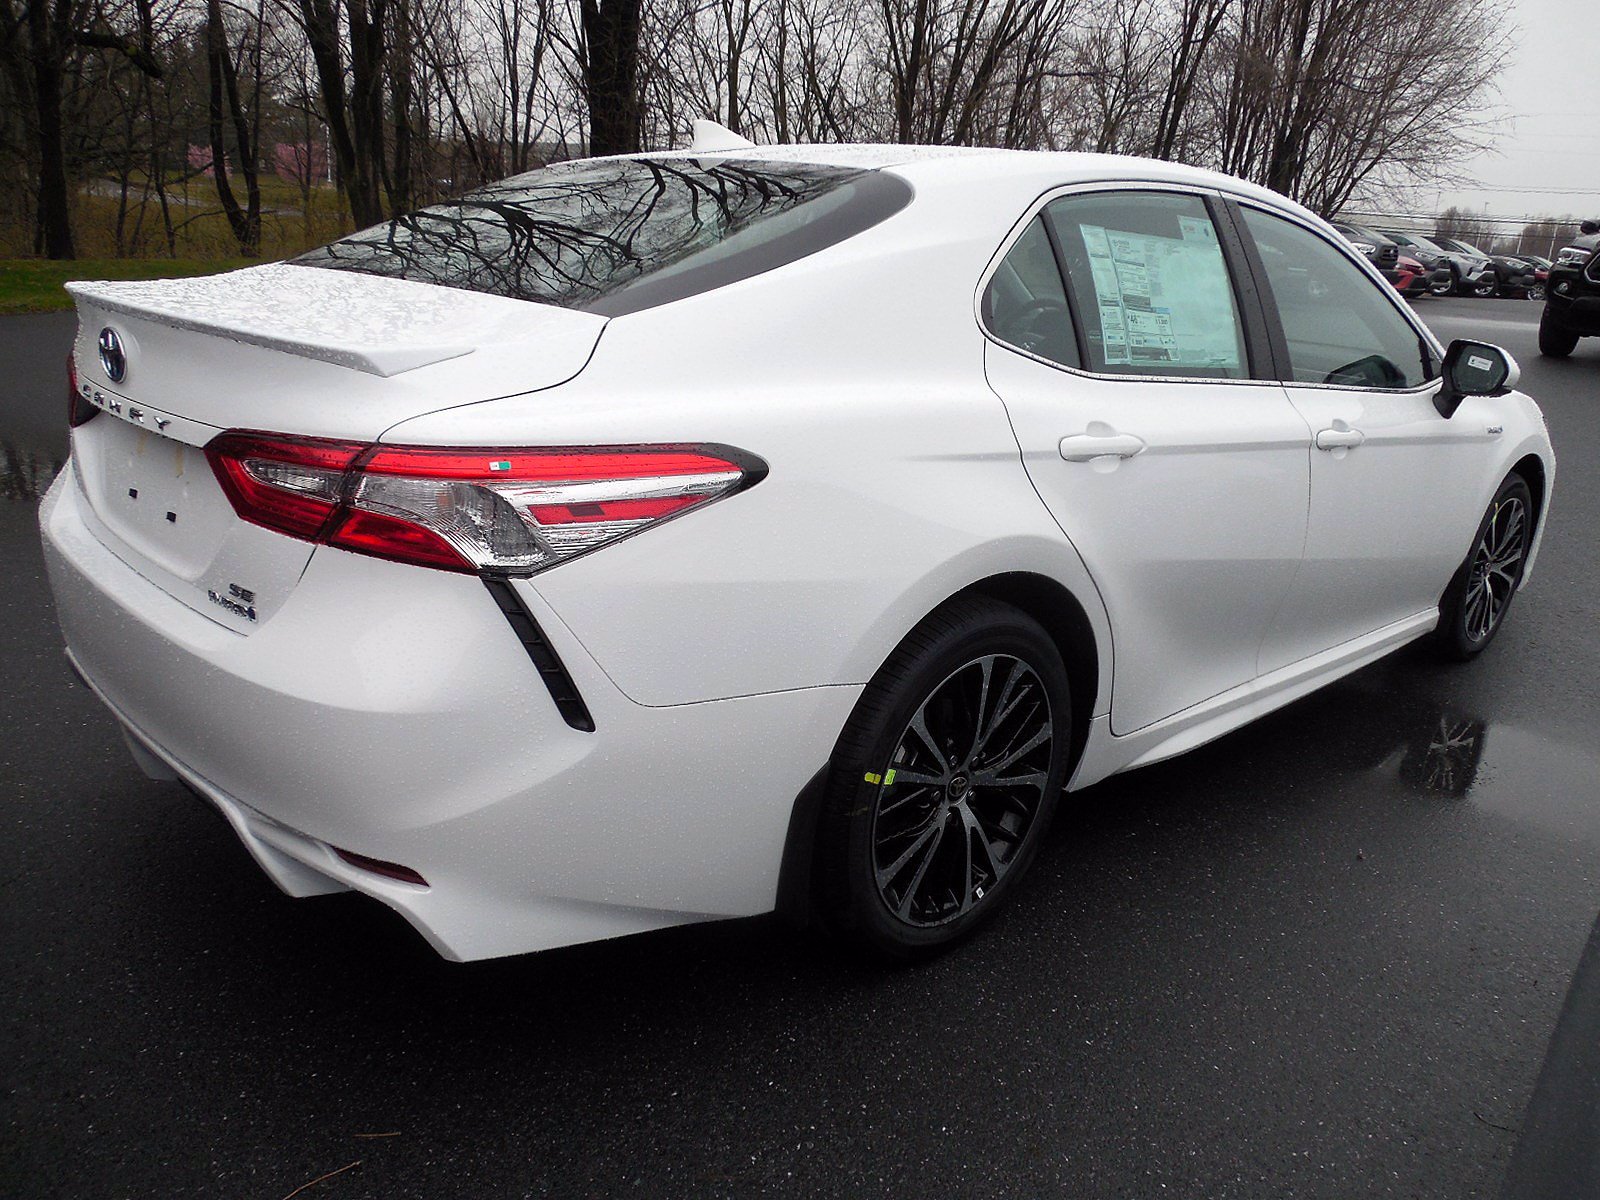 New 2020 Toyota Camry Hybrid SE 4dr Car in East Petersburg #14849 ...
